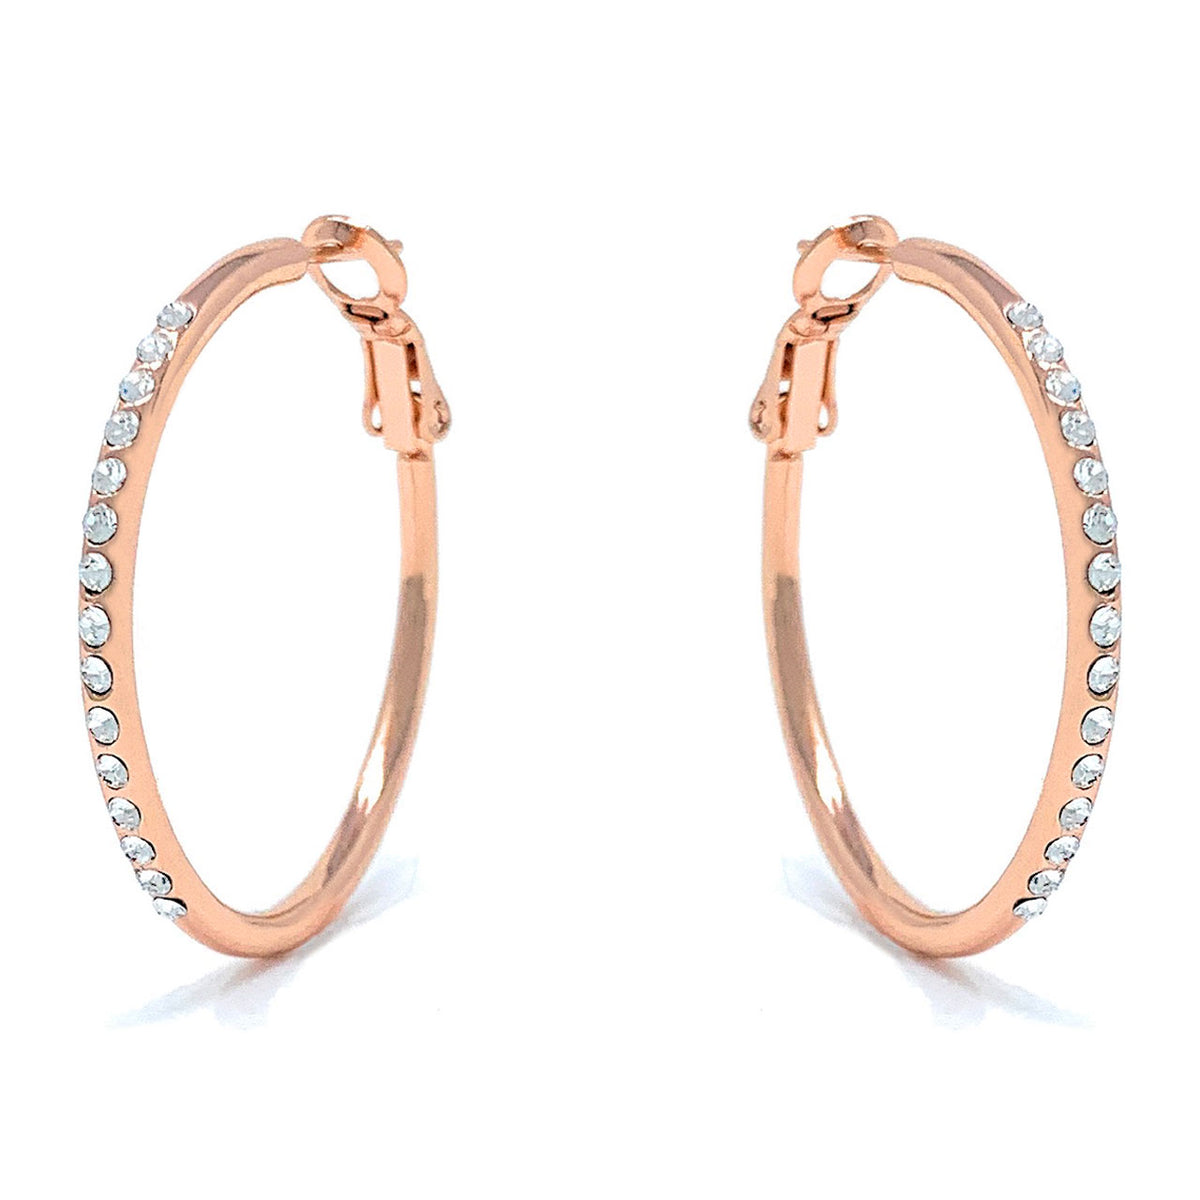 Amelia Small Pave Hoop Earrings with White Clear Round Crystals from Swarovski Rose Gold Plated - Ed Heart